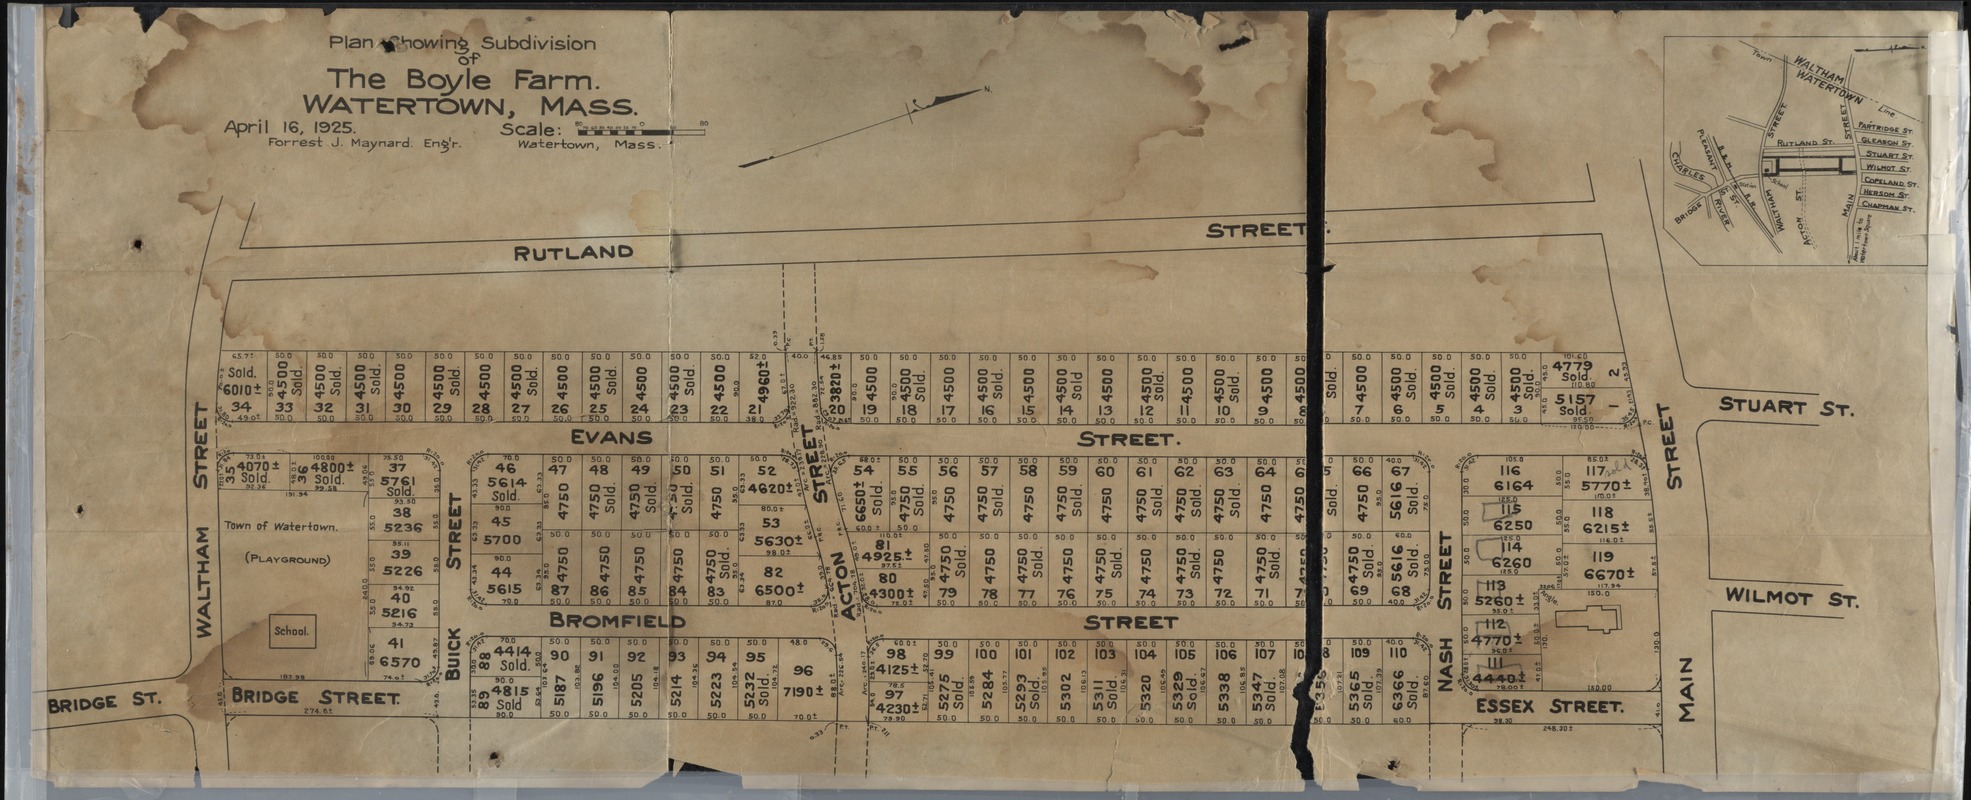 Plan showing subdivision of the Boyle Farm. Watertown, Mass.